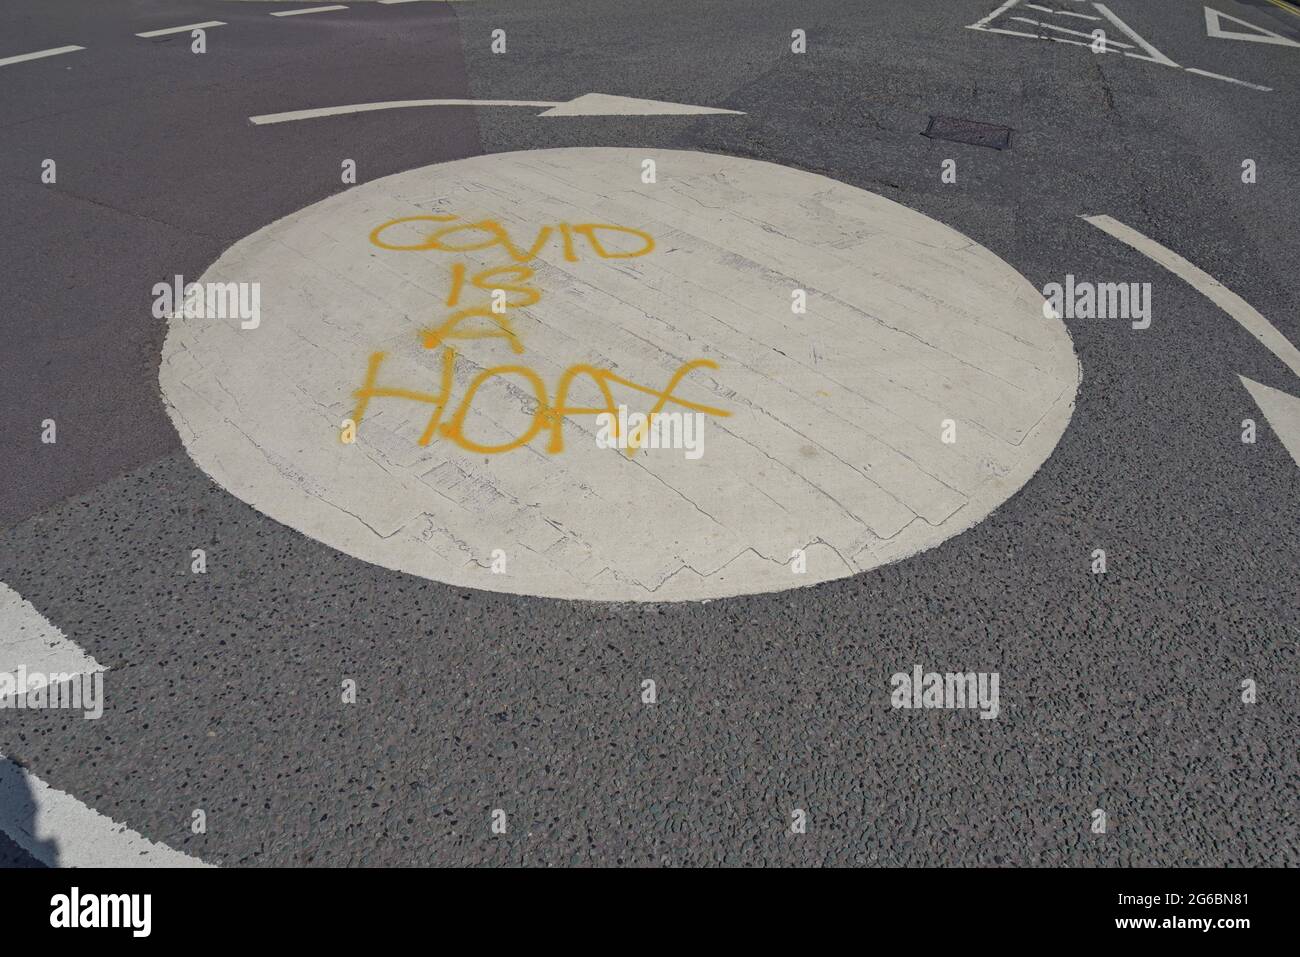 'Covid is a hoax' spray painted on a roundabout in Ironbridge, near Telford UK, by Covid deniers, June 2021 Stock Photo